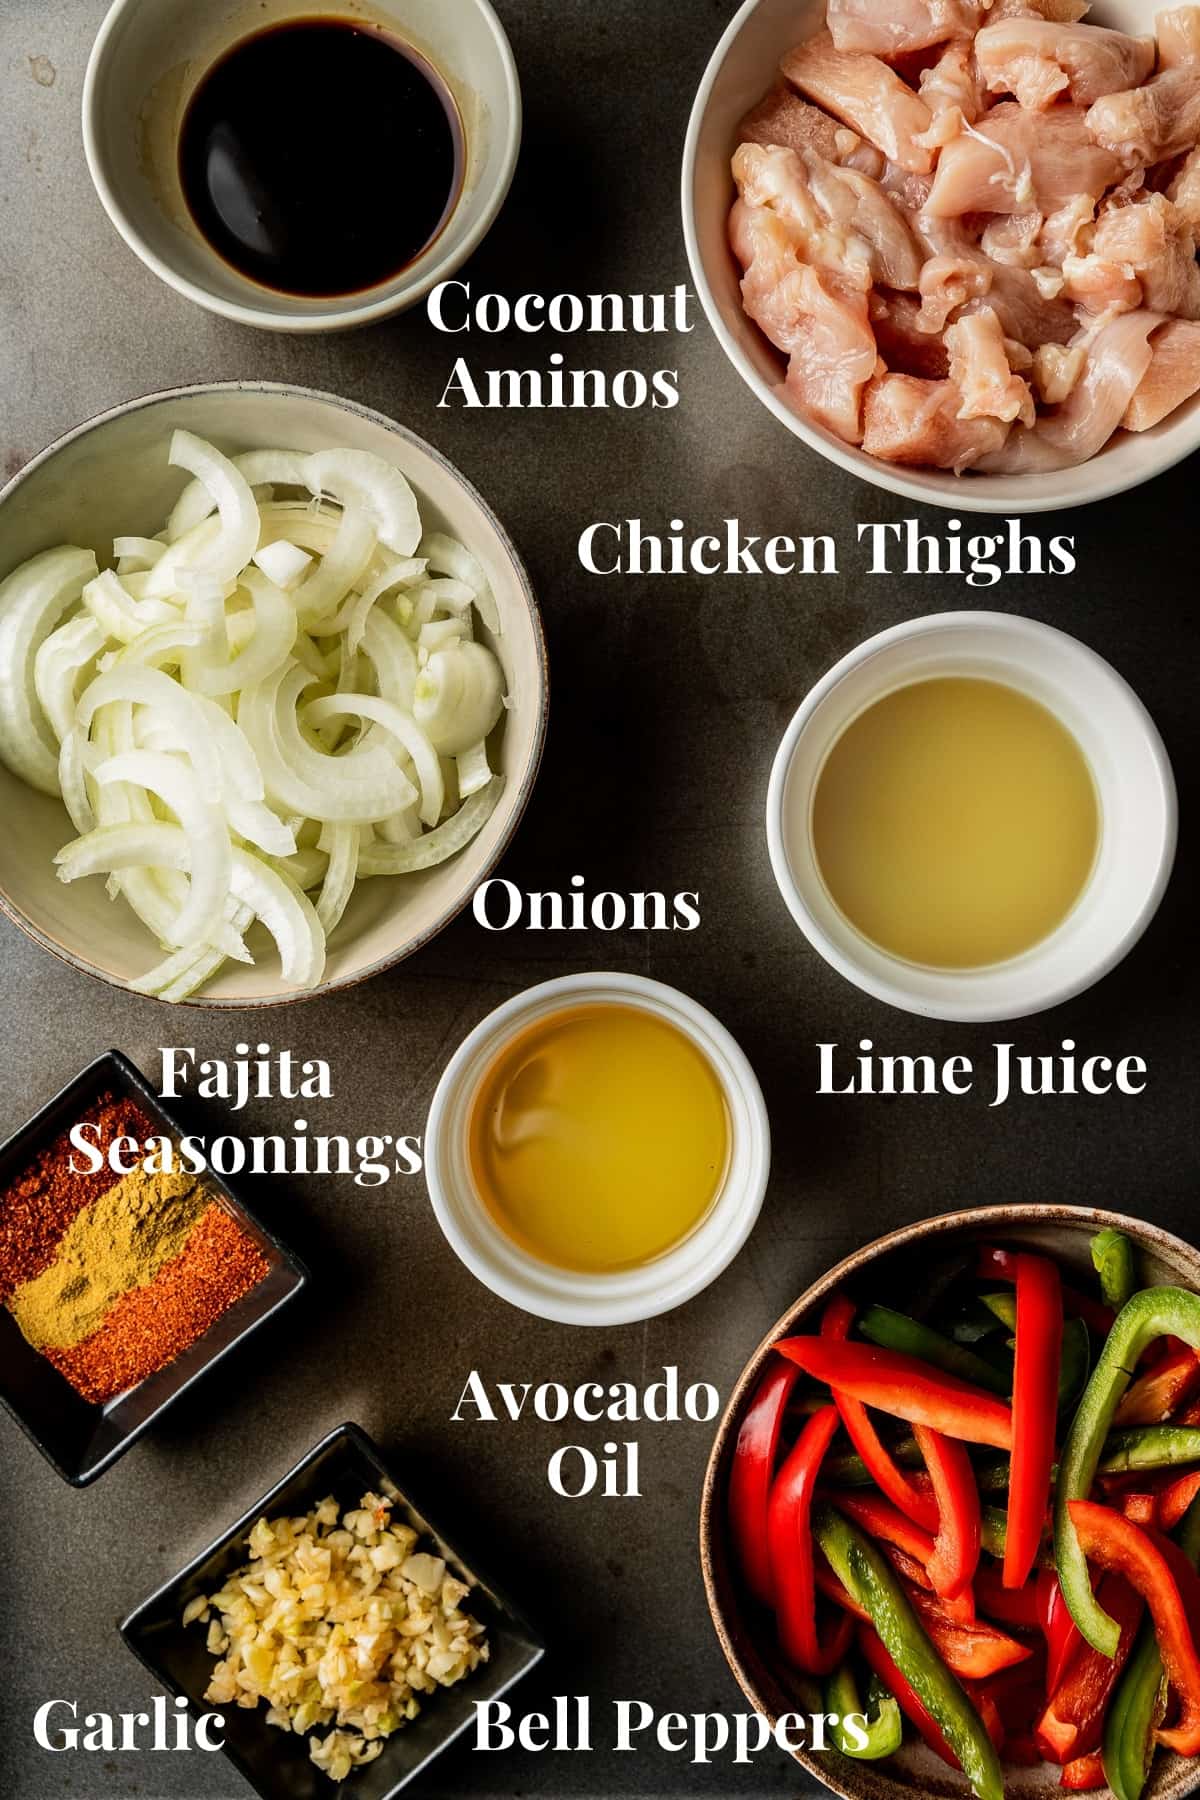 An overview shot of the ingredients needed for fajitas in separate bowls on a black background